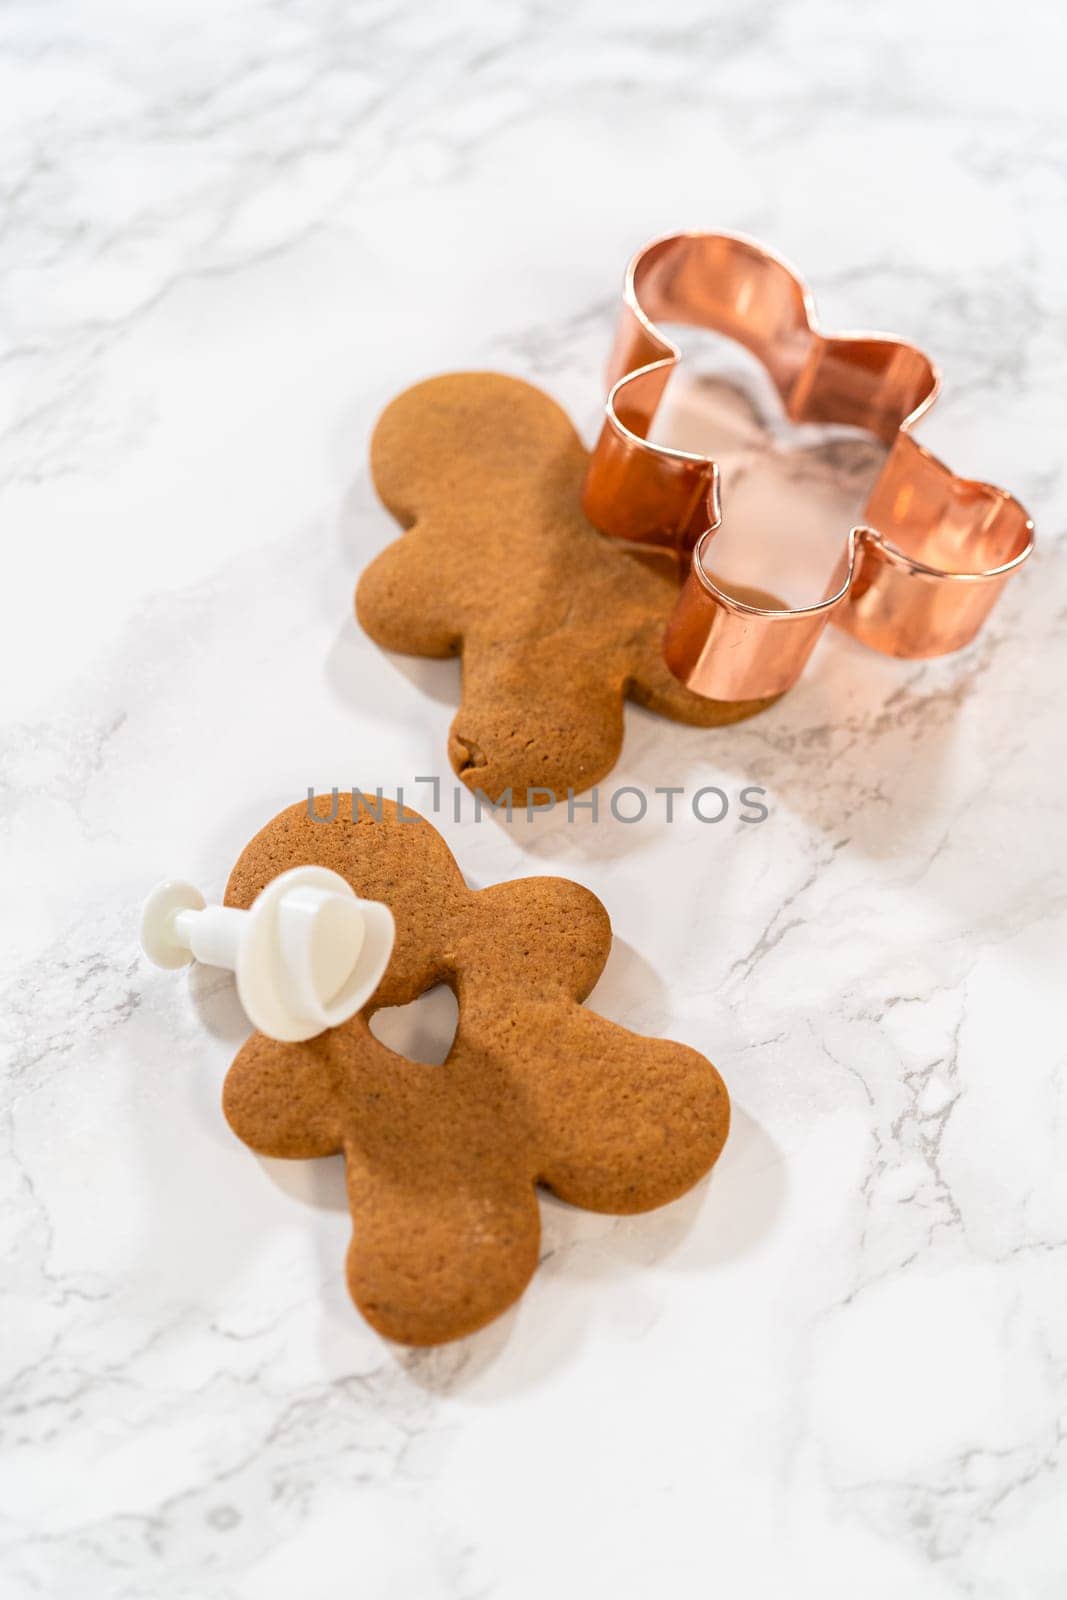 Golden-Brown Gingerbread Cookies with Heart Cutouts by arinahabich